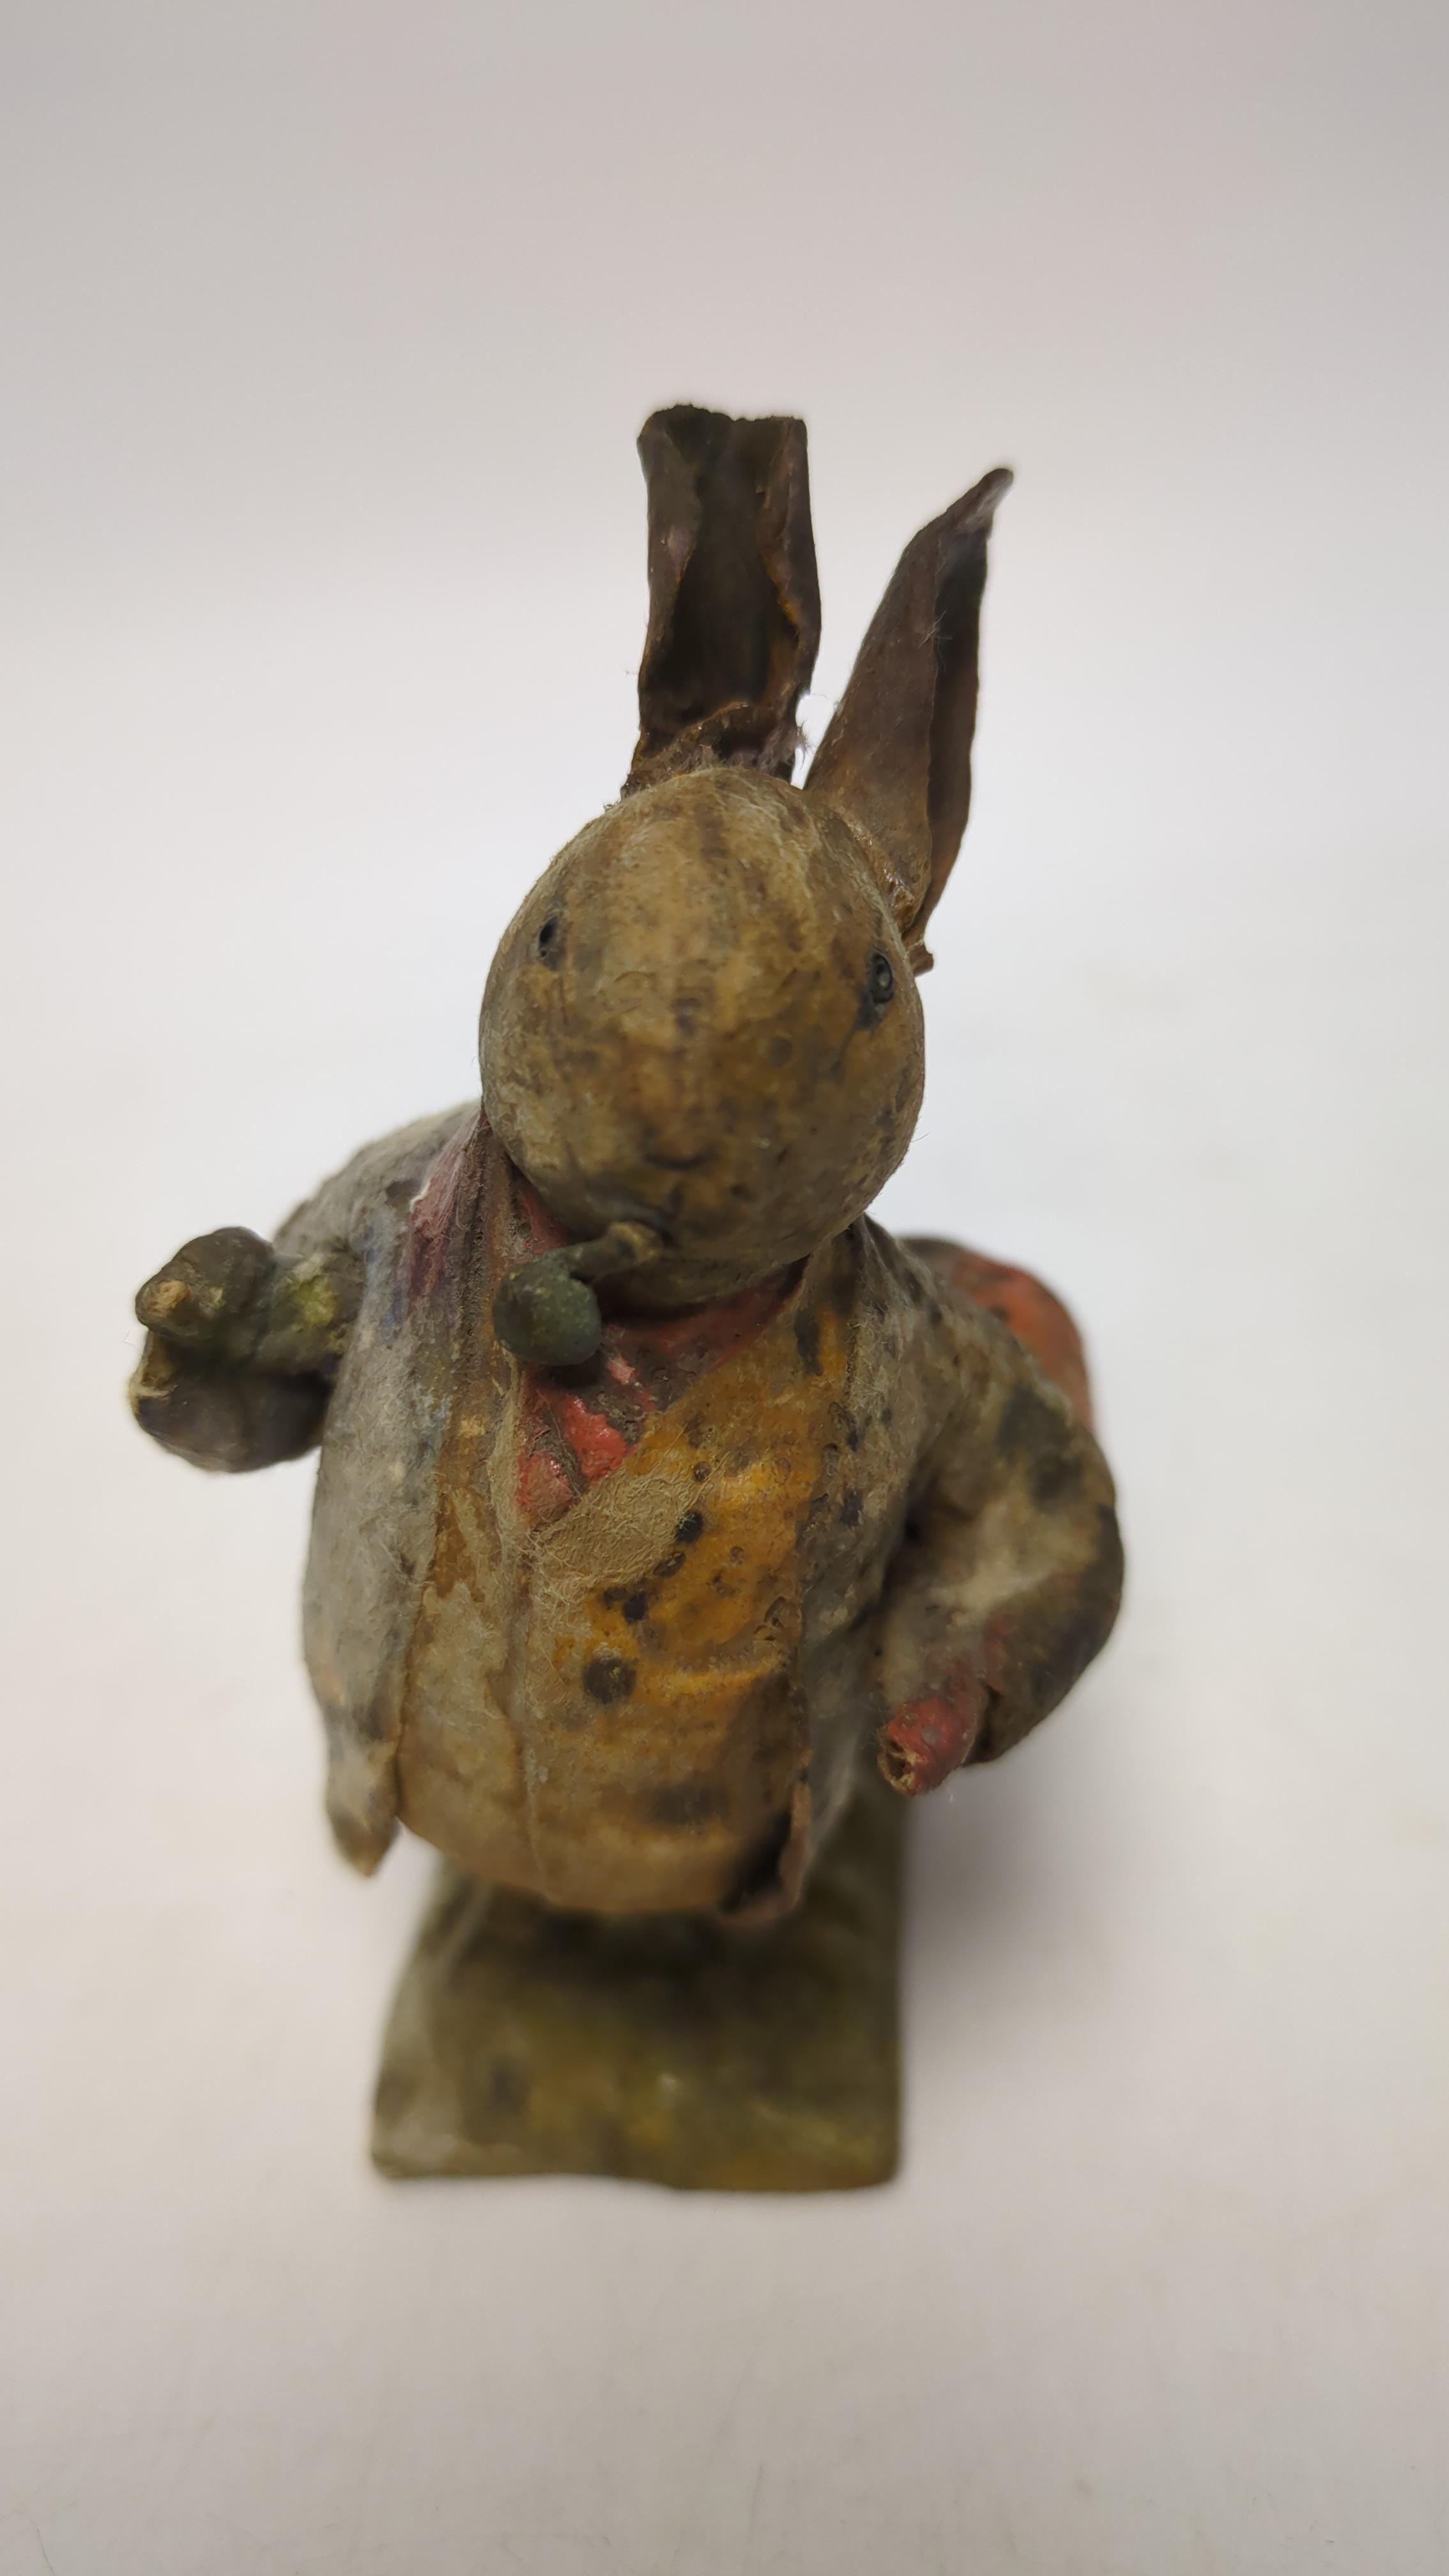 An F. Warne papier-mâché Beatrix Potter figure of Benjamin Bunny with pipe and red handkerchief bag, red and white F. Warne & Co. paper label to the base, dating it to pre-1917, 9cm high